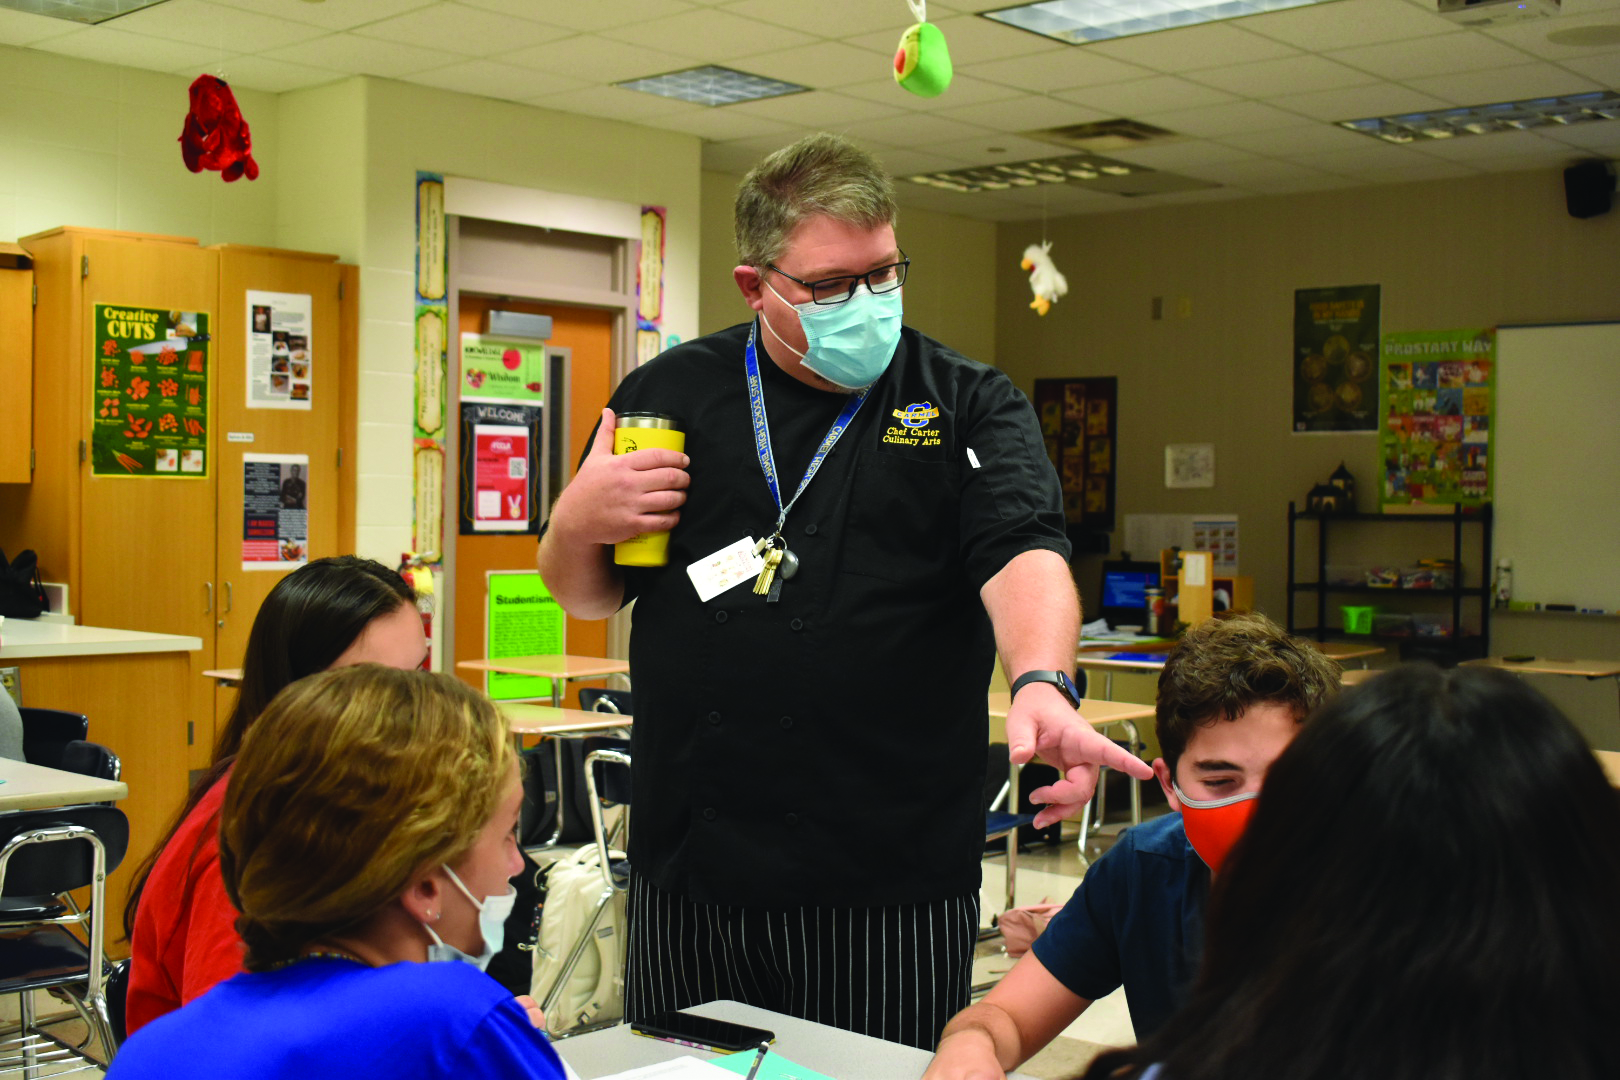 Culinary Arts teacher Nicholas Carter, wearing a traditional chef’s jacket, instructs his students on collaboration skills in the kitchen on Sept. 8. He said usually second year culinary students run the Carmel Arts Festival booth, providing them valuable cooking experience.